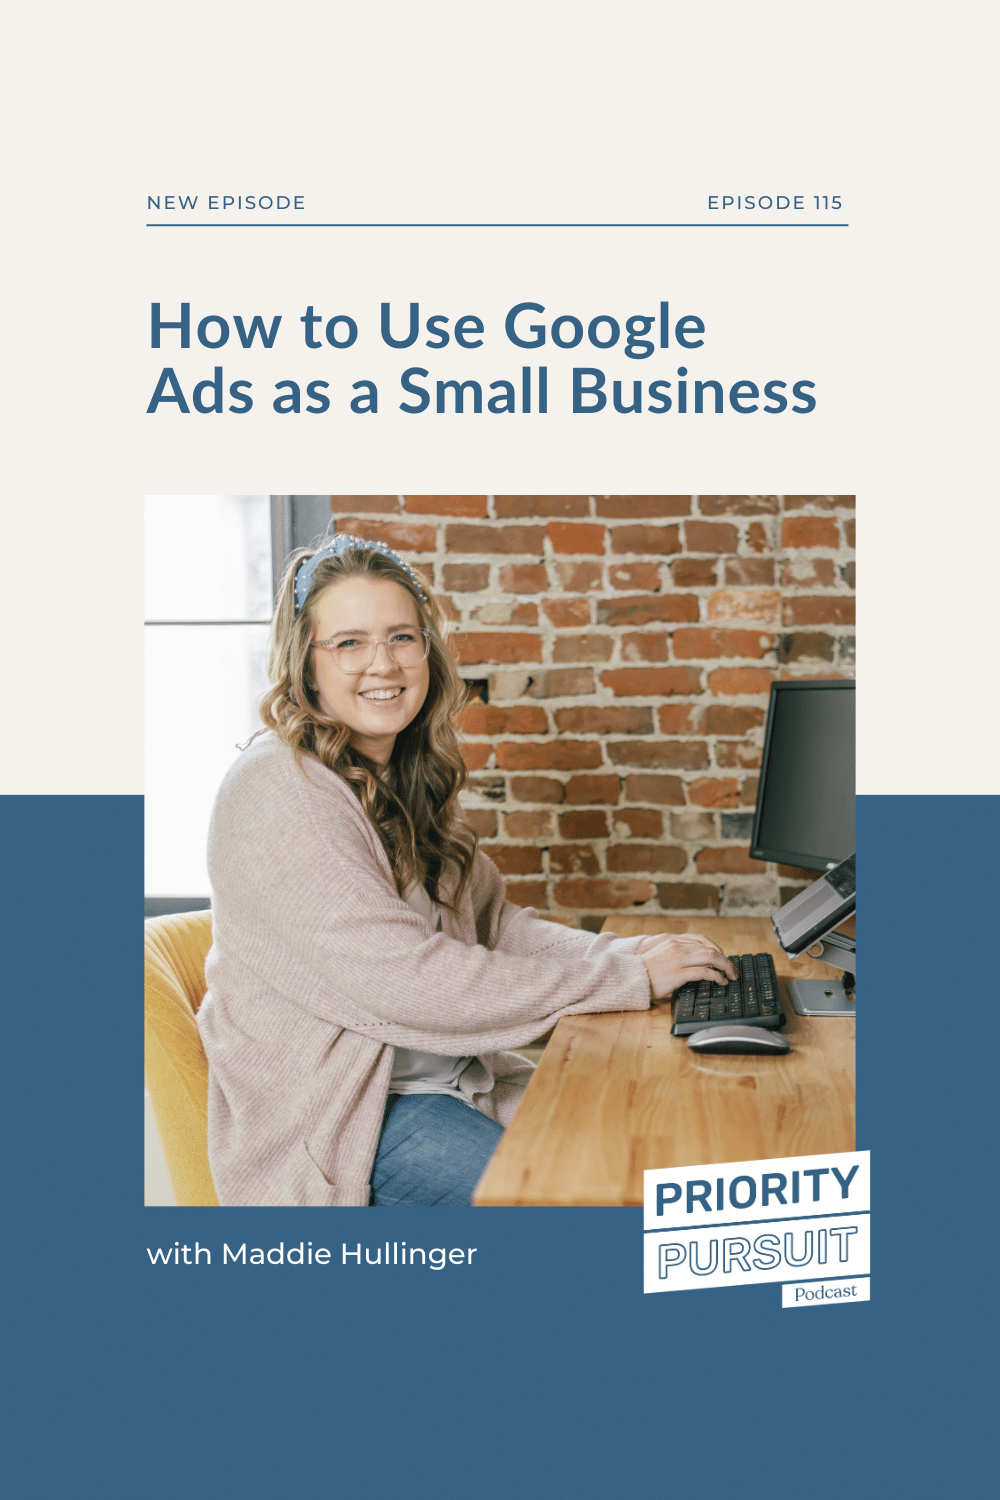 Dive into everything you need to know about how to use Google Ads as a small business on the Priority Pursuit Podcast!